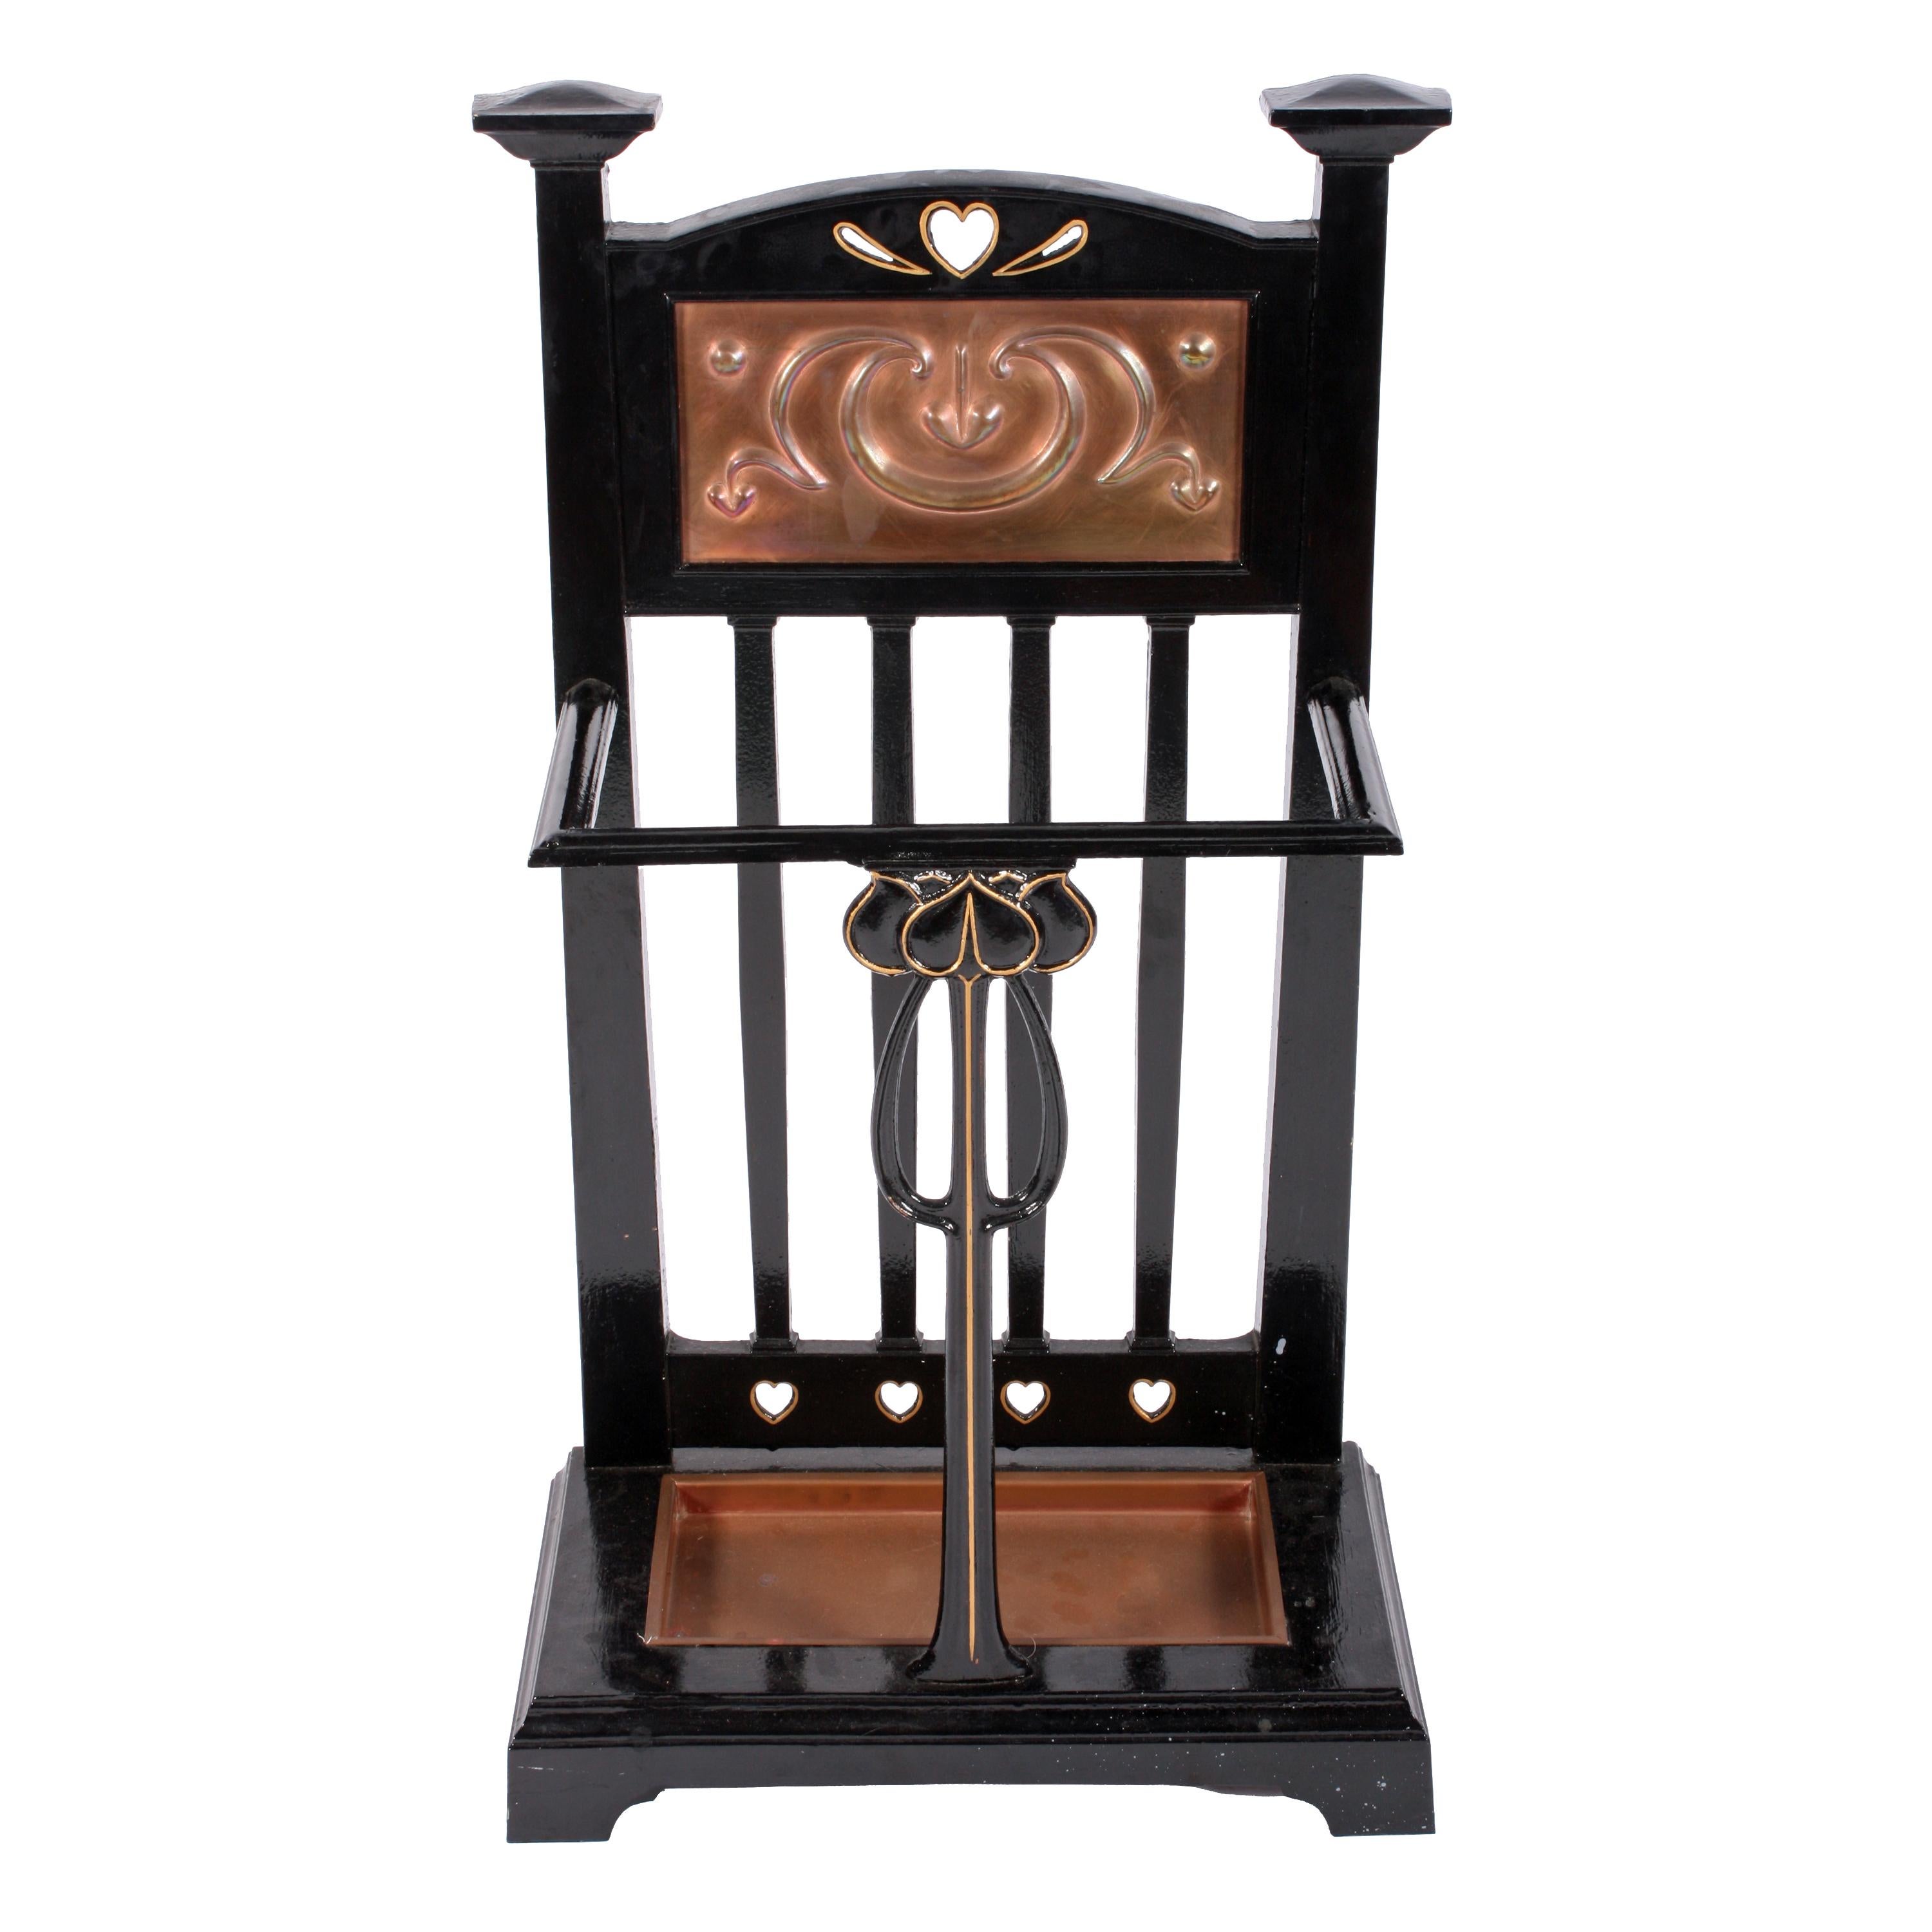 An early 20th century Edwardian cast iron stick and umbrella stand.

The Art Nouveau design cast iron frame is black painted and highlighted in gilt with a decorative copper panel and drip tray.

The stand has cast into the back and underneath